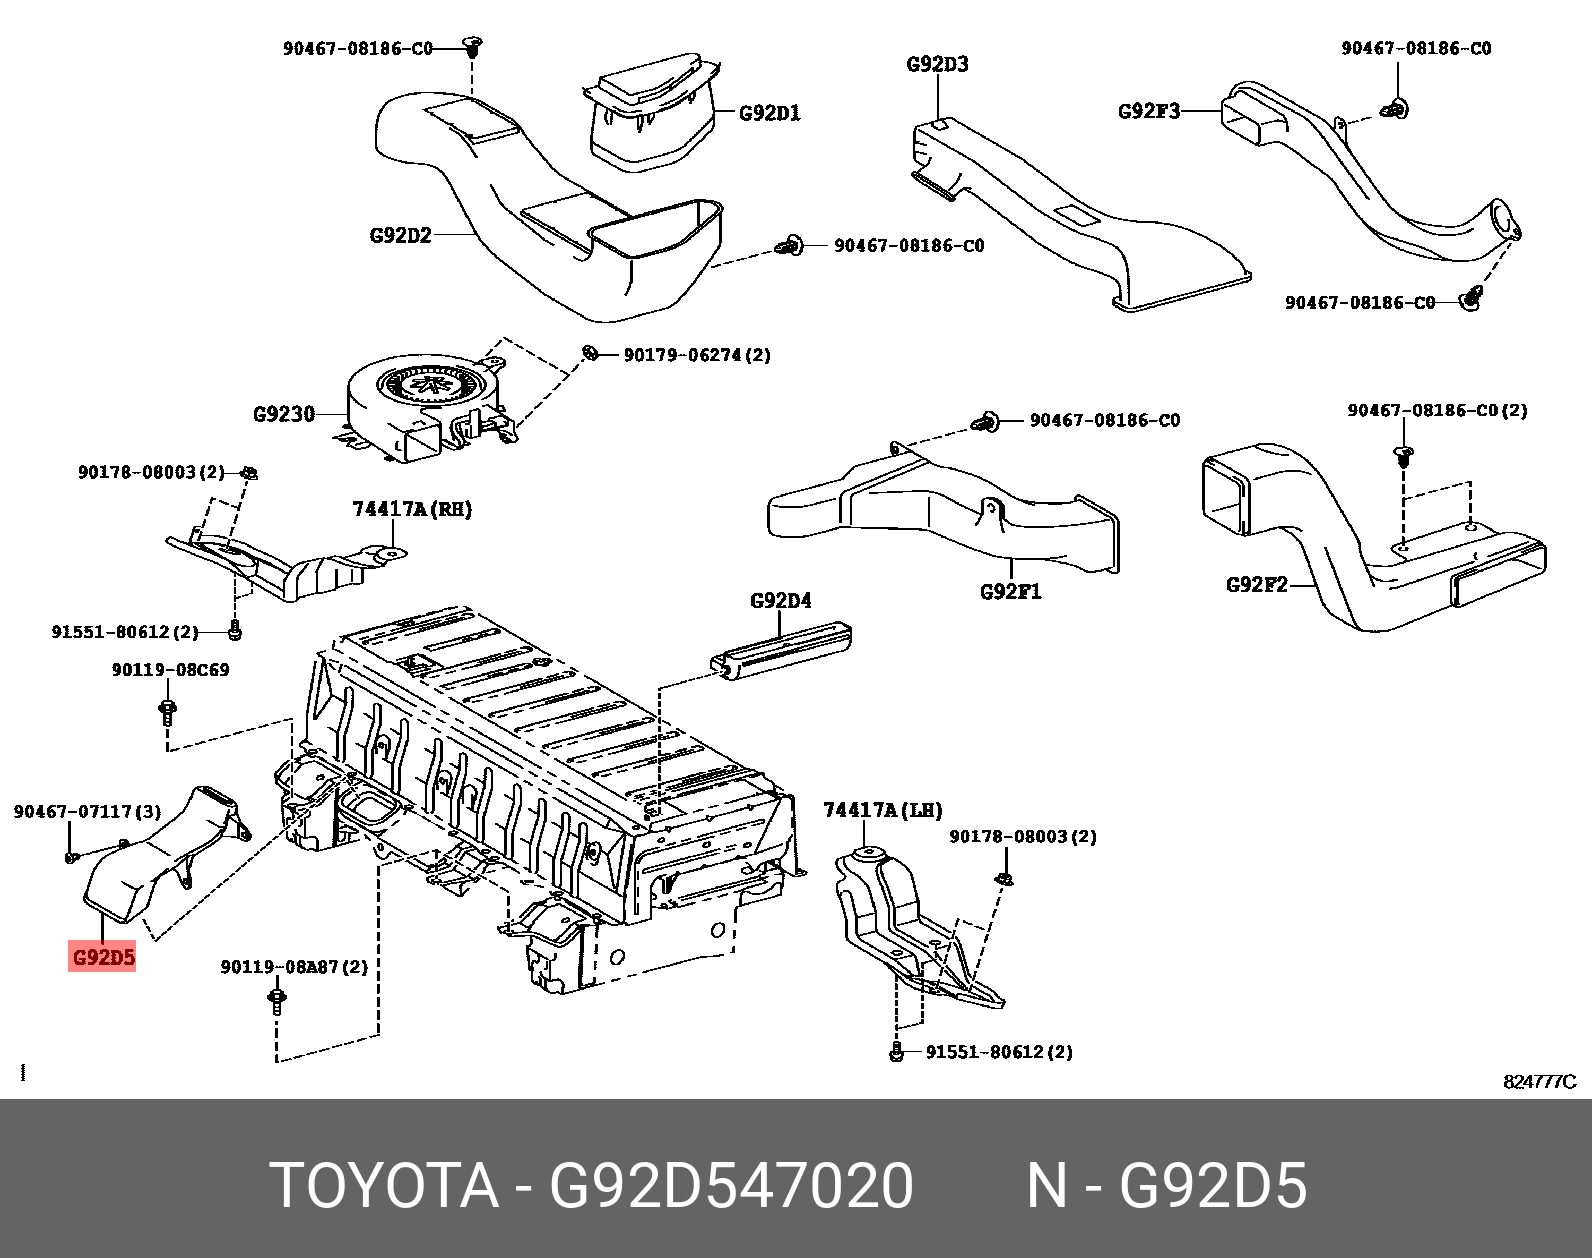 PRIUS (PLUG-IN) LEASE 200912 - 201010, DUCT, HYBRID BATTERY INTAKE, NO.5